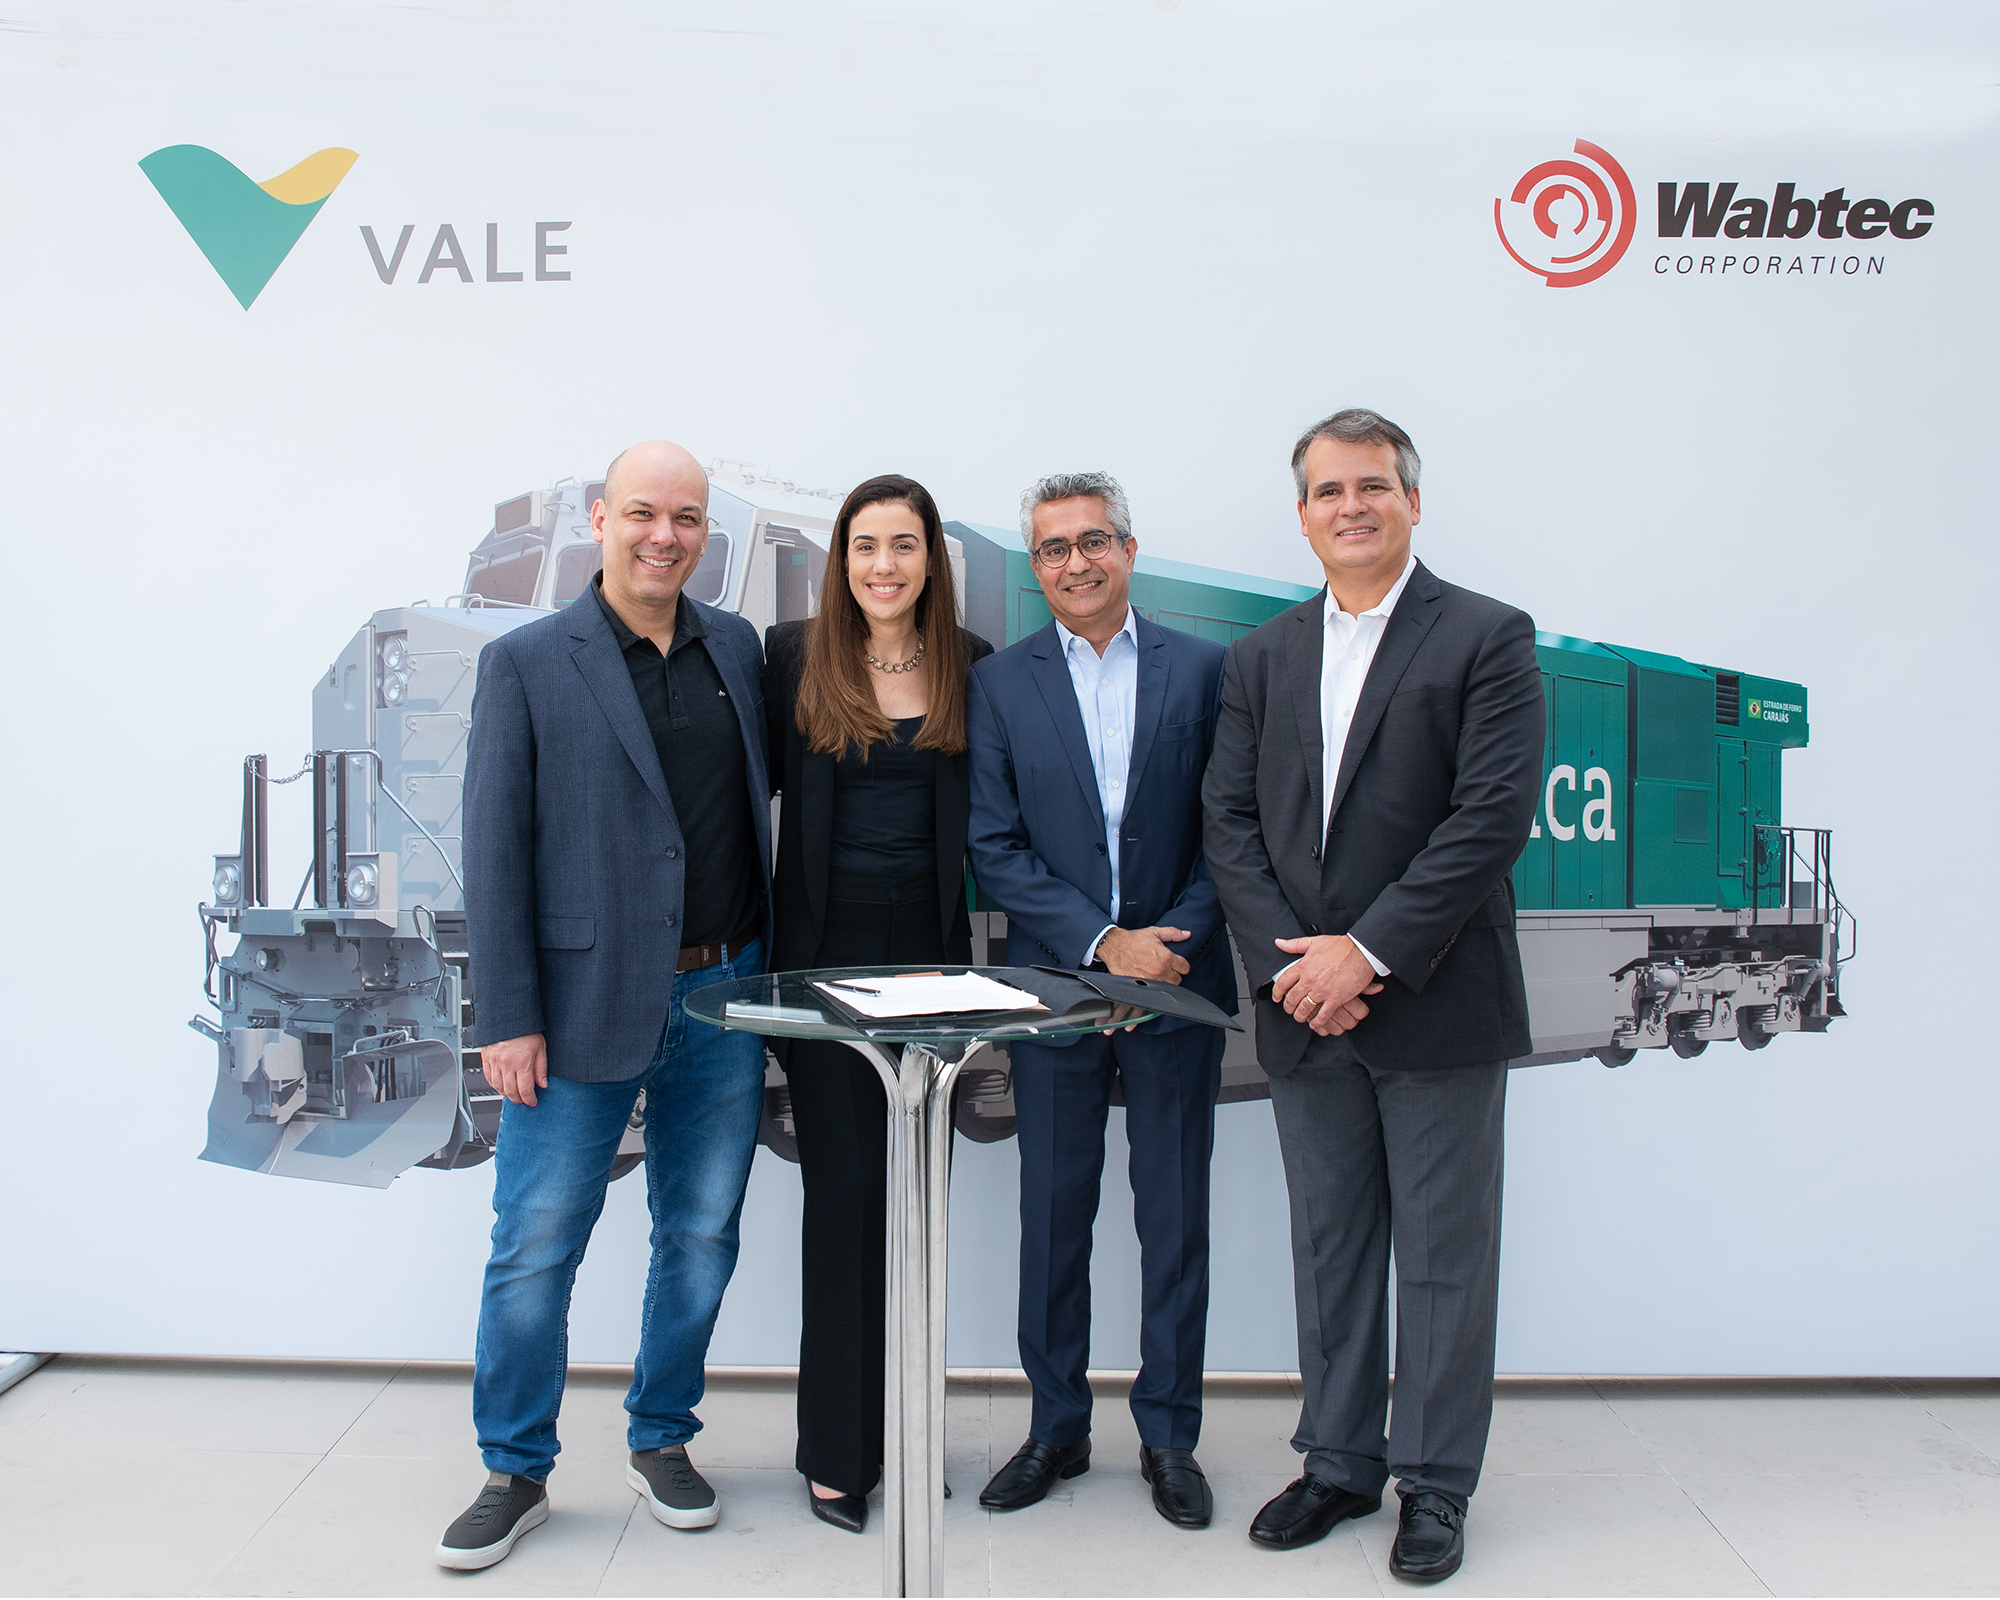 Vale Partners with Wabtec on Alternative Fuels Study and Orders Three FLXdrive Battery-Electric Locomotives